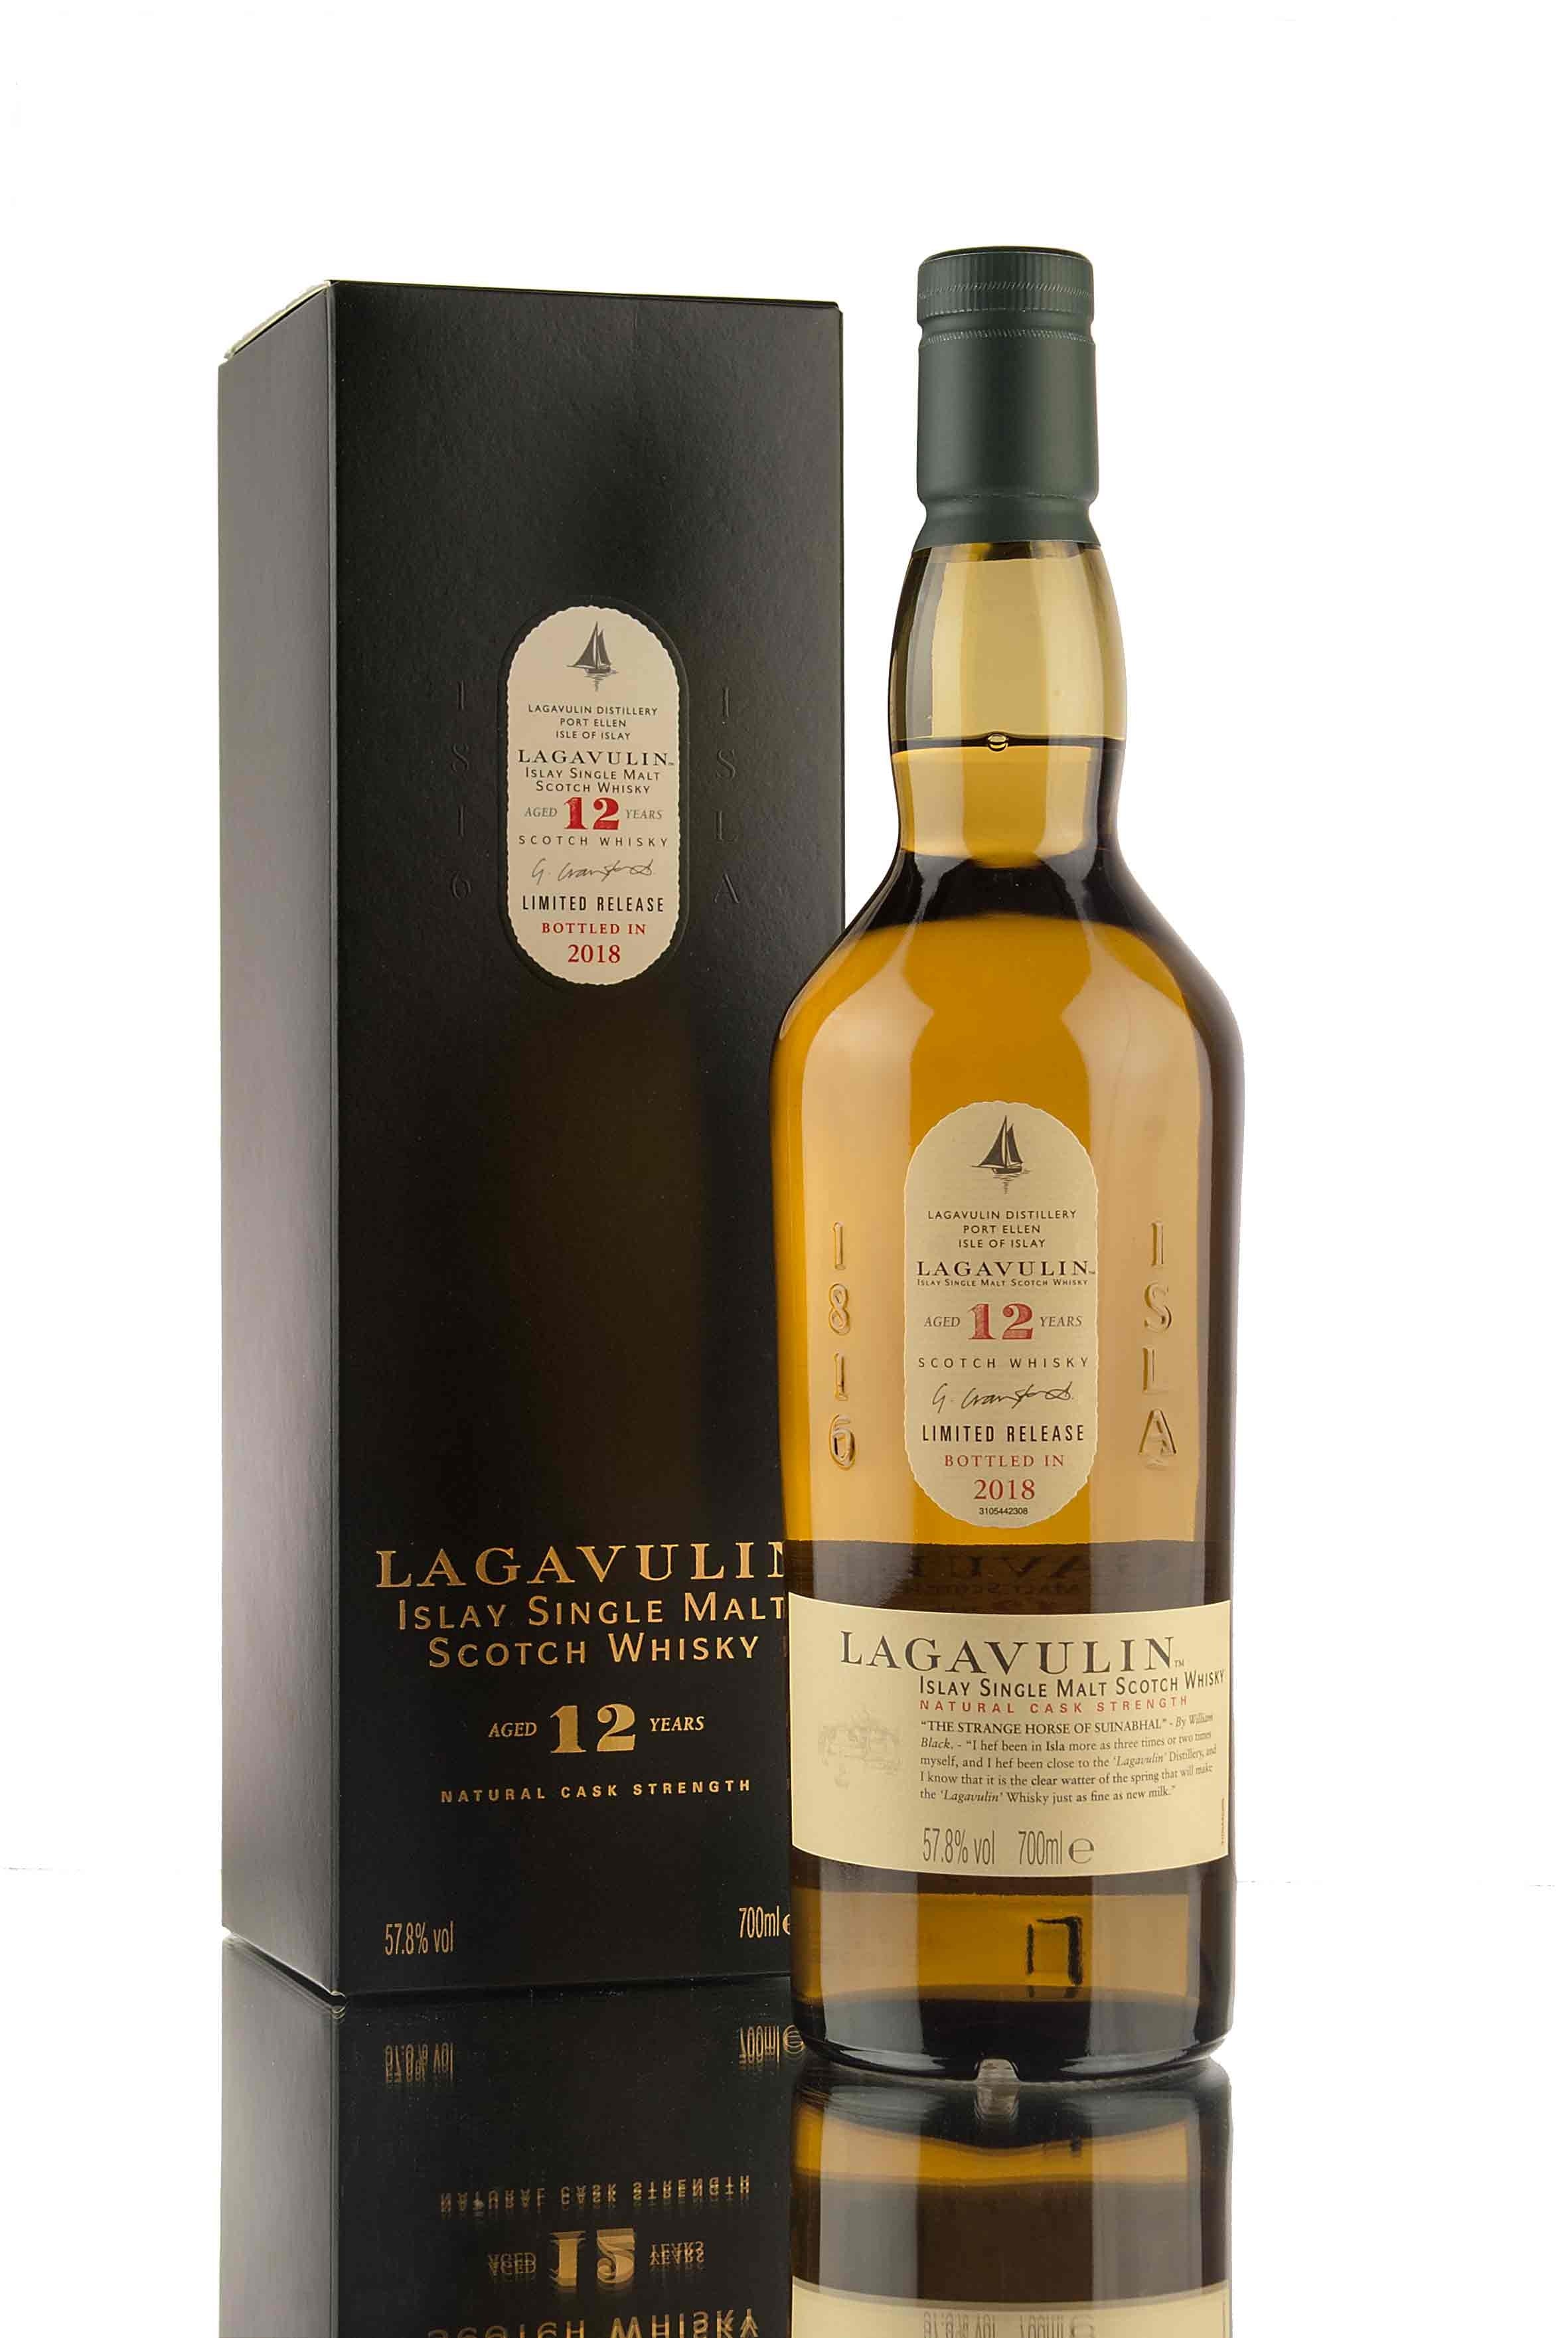 Lagavulin 12 Year Old | Diageo Special Release 2018